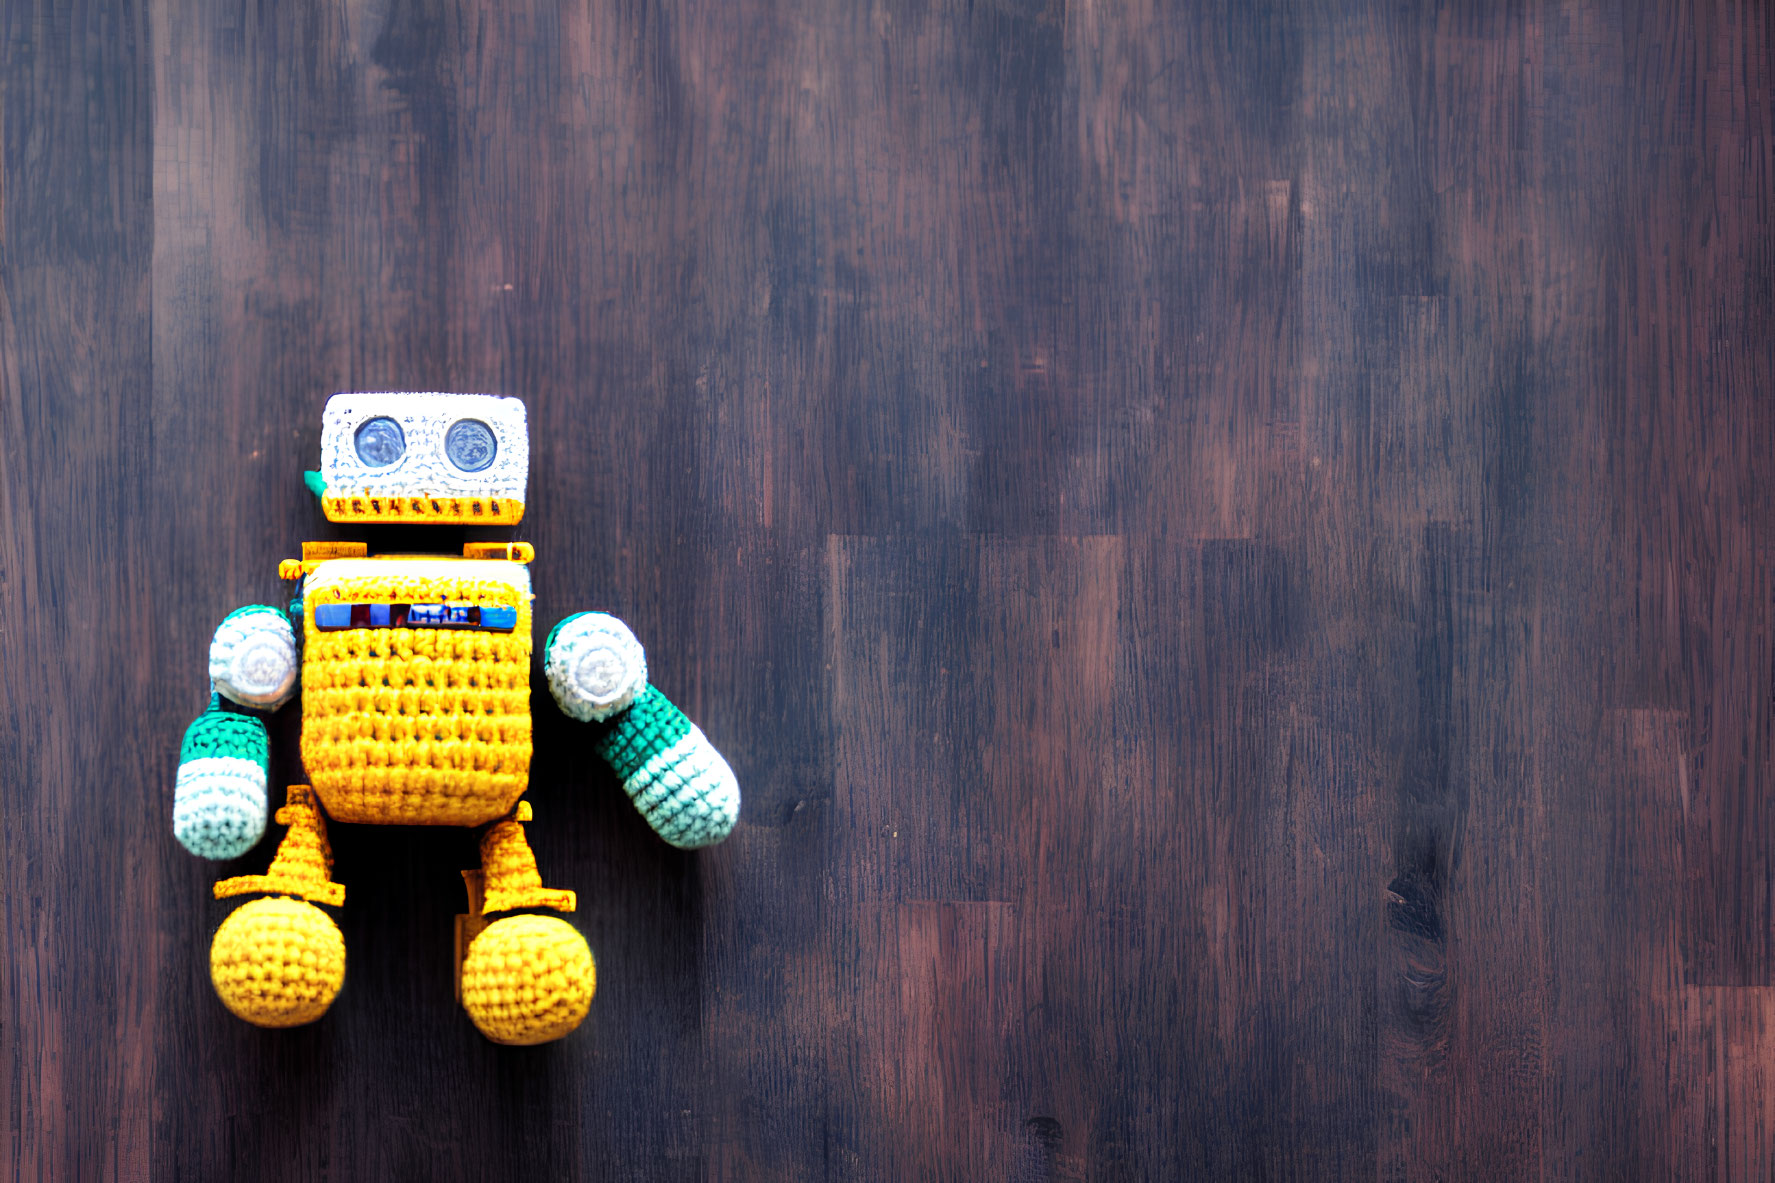 Handmade Crochet Robot Toy in Yellow and Blue on Dark Wooden Background